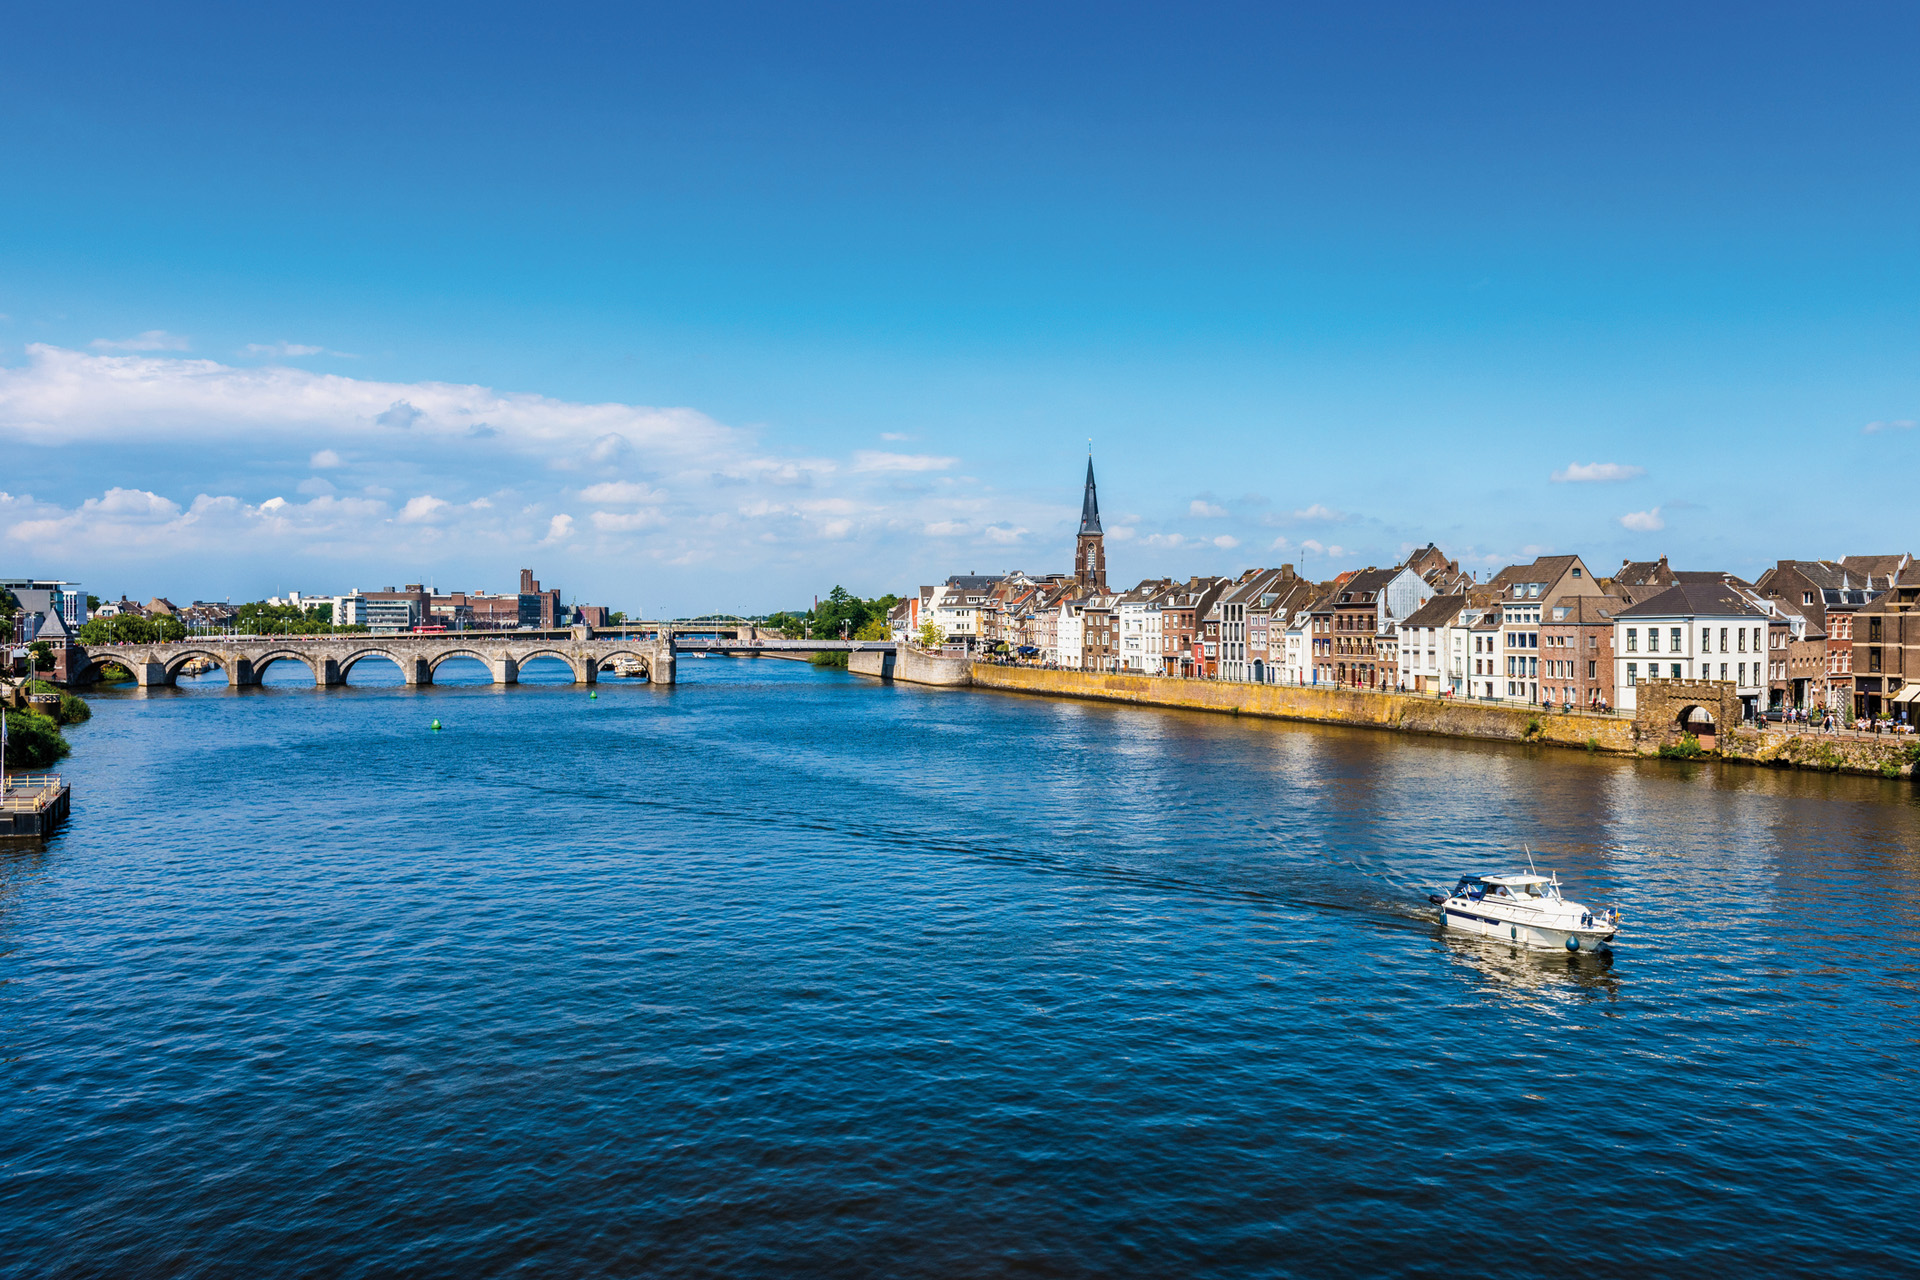 How To Spend A Weekend In Maastricht